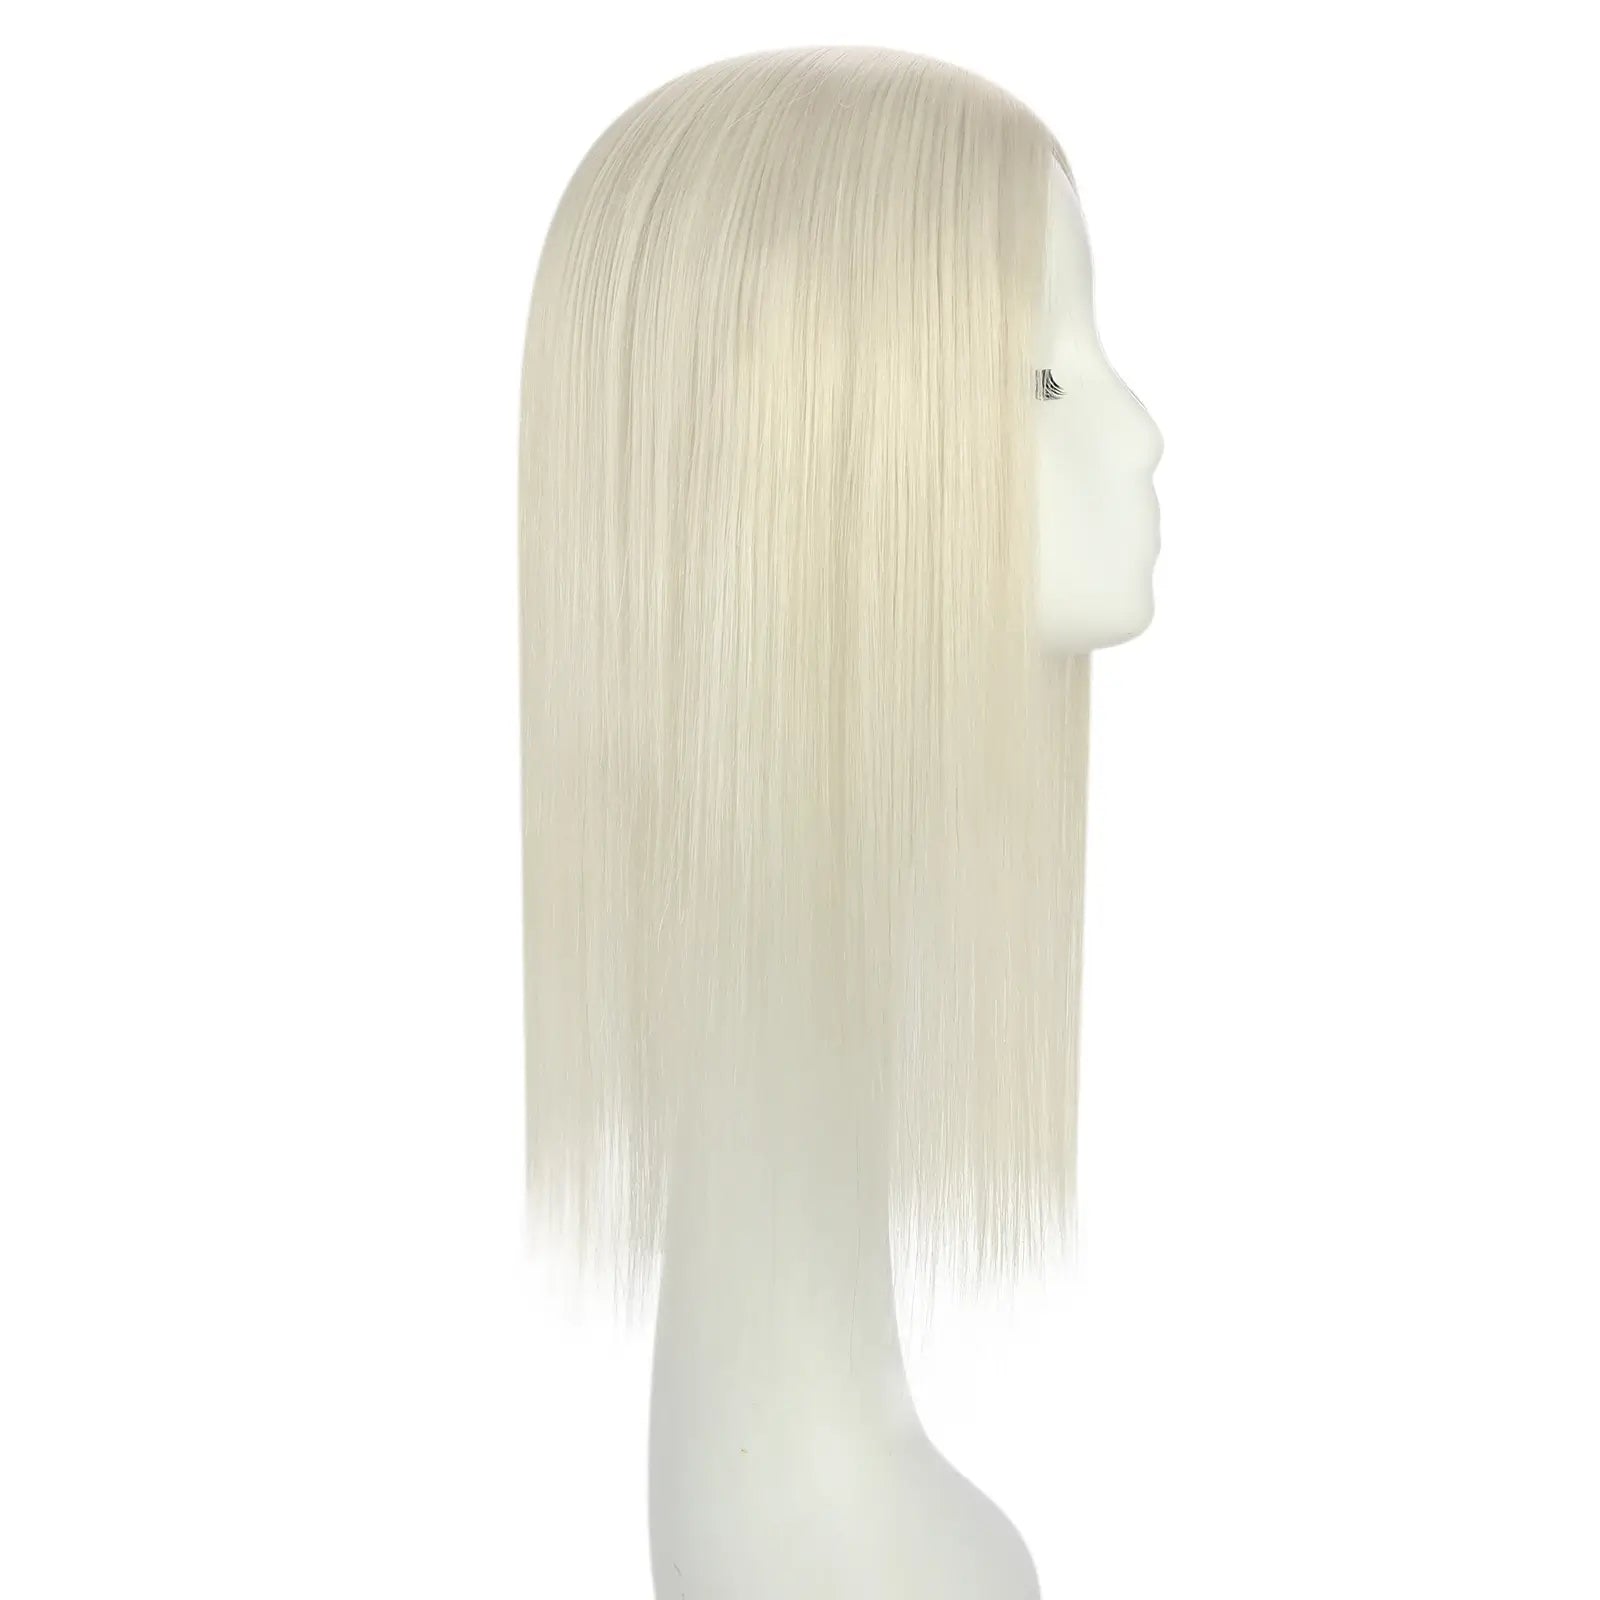 platinumblondehairpiecetopper